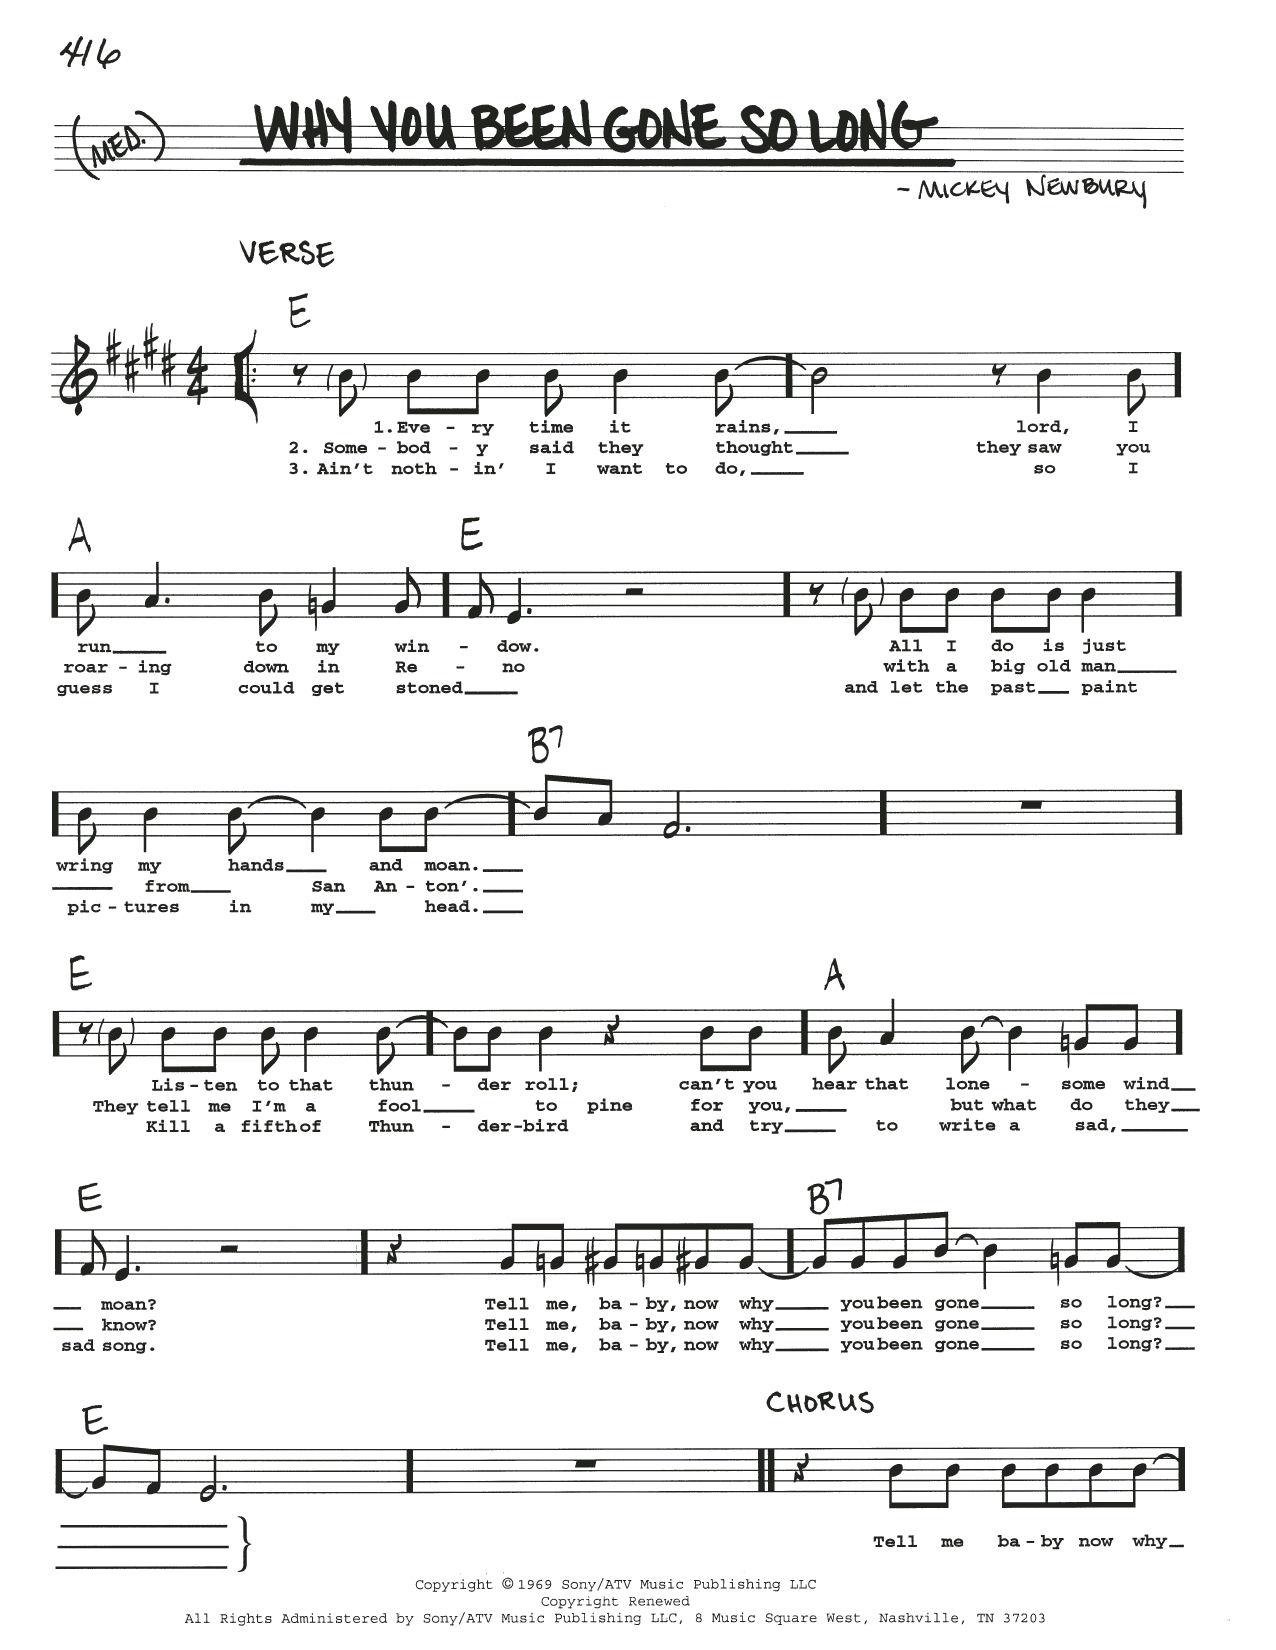 Download Mickey Newbury Why You Been Gone So Long Sheet Music